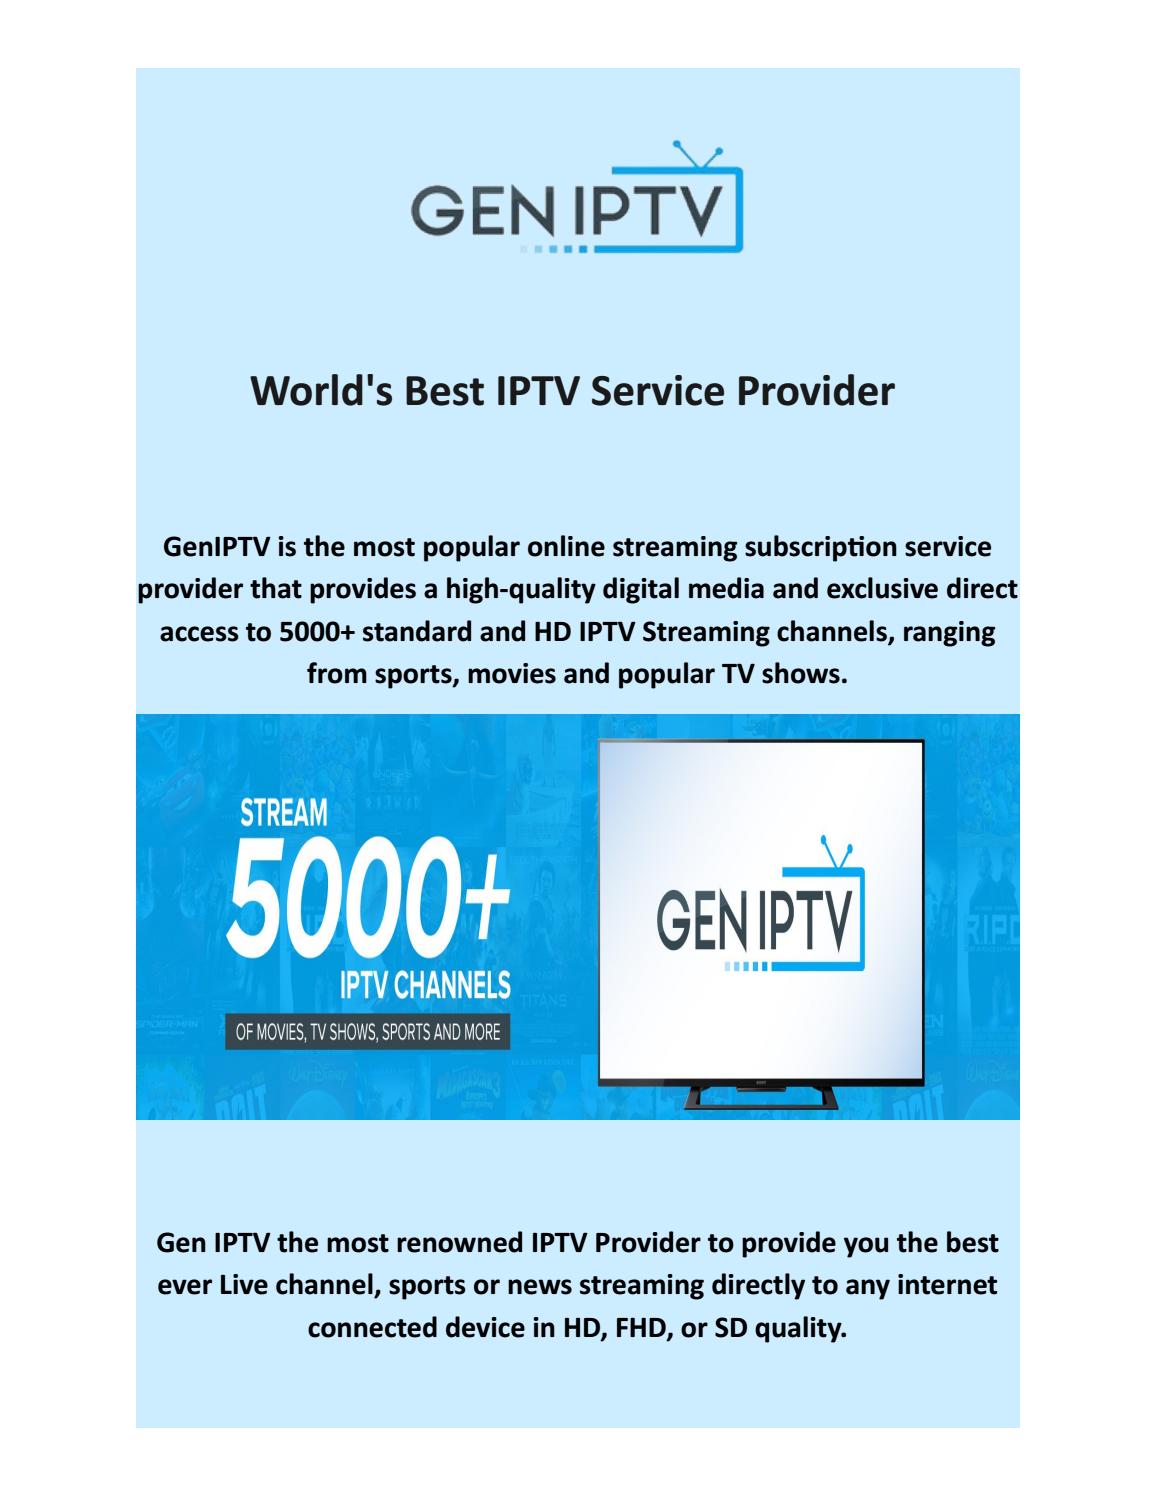 Iptv Reseller Projects :: Photos, videos, logos, illustrations and branding :: Behance